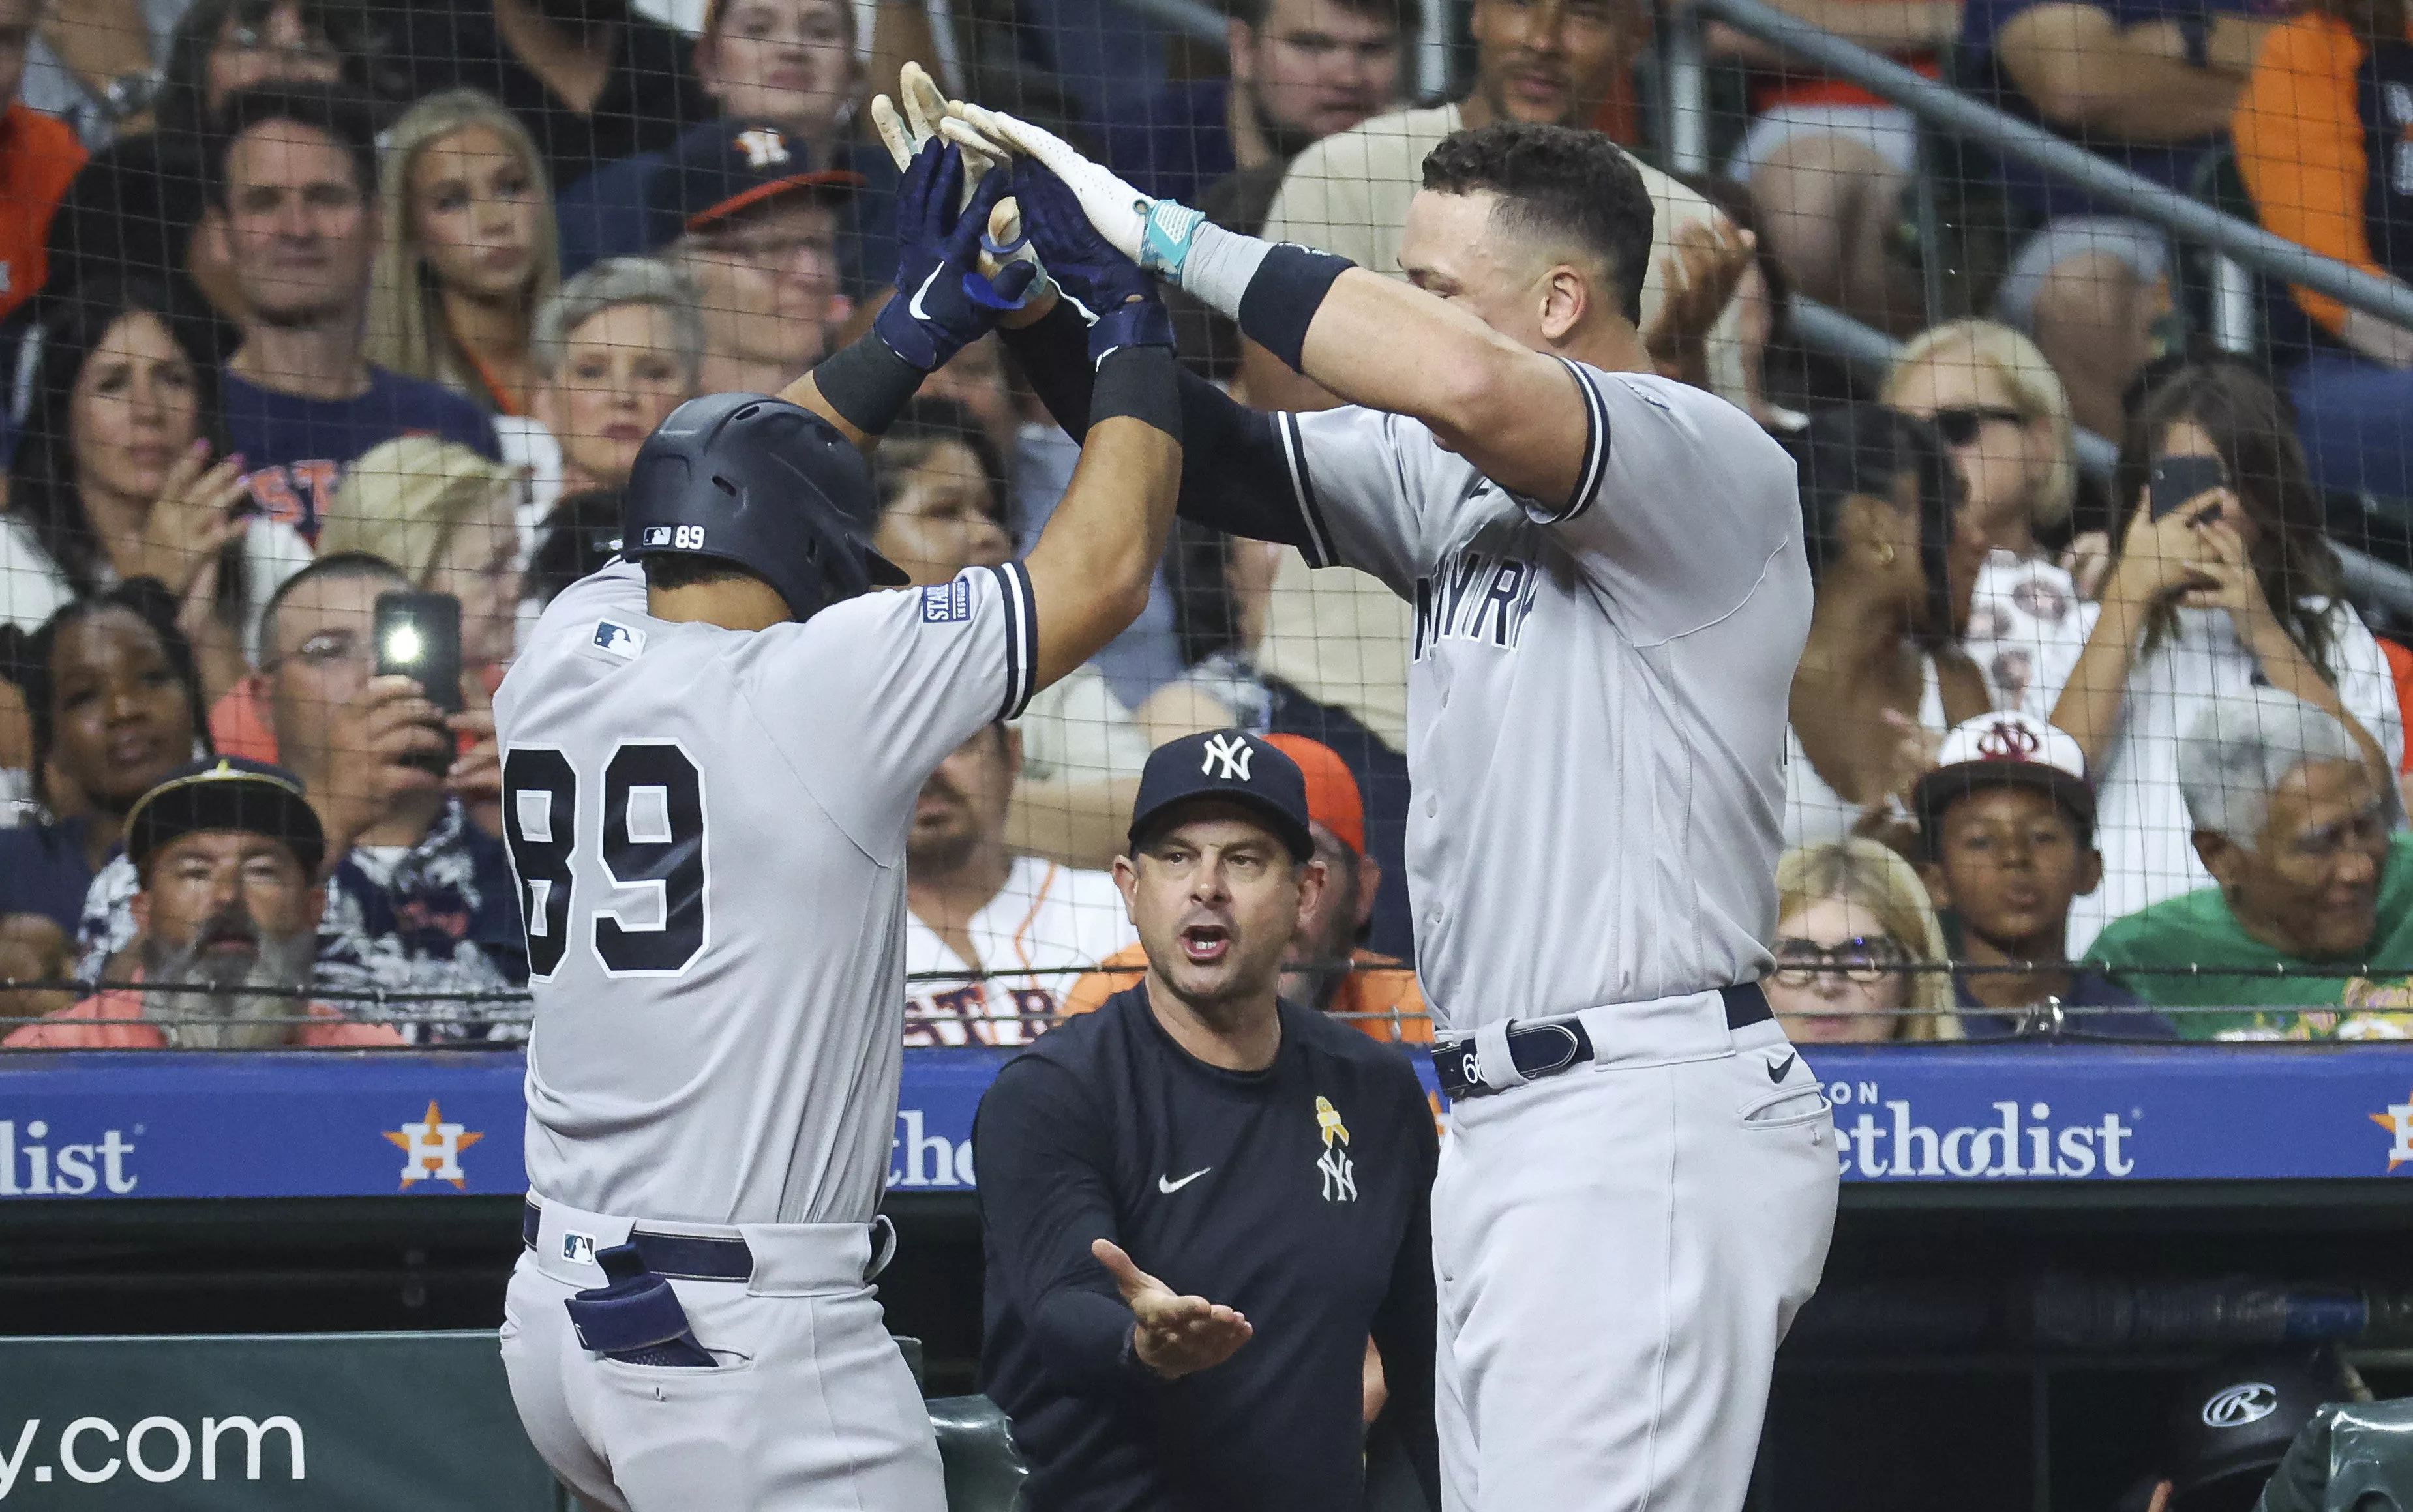 Today's Iconic Moment in NY Sports: Aaron Judge wins the Home Run